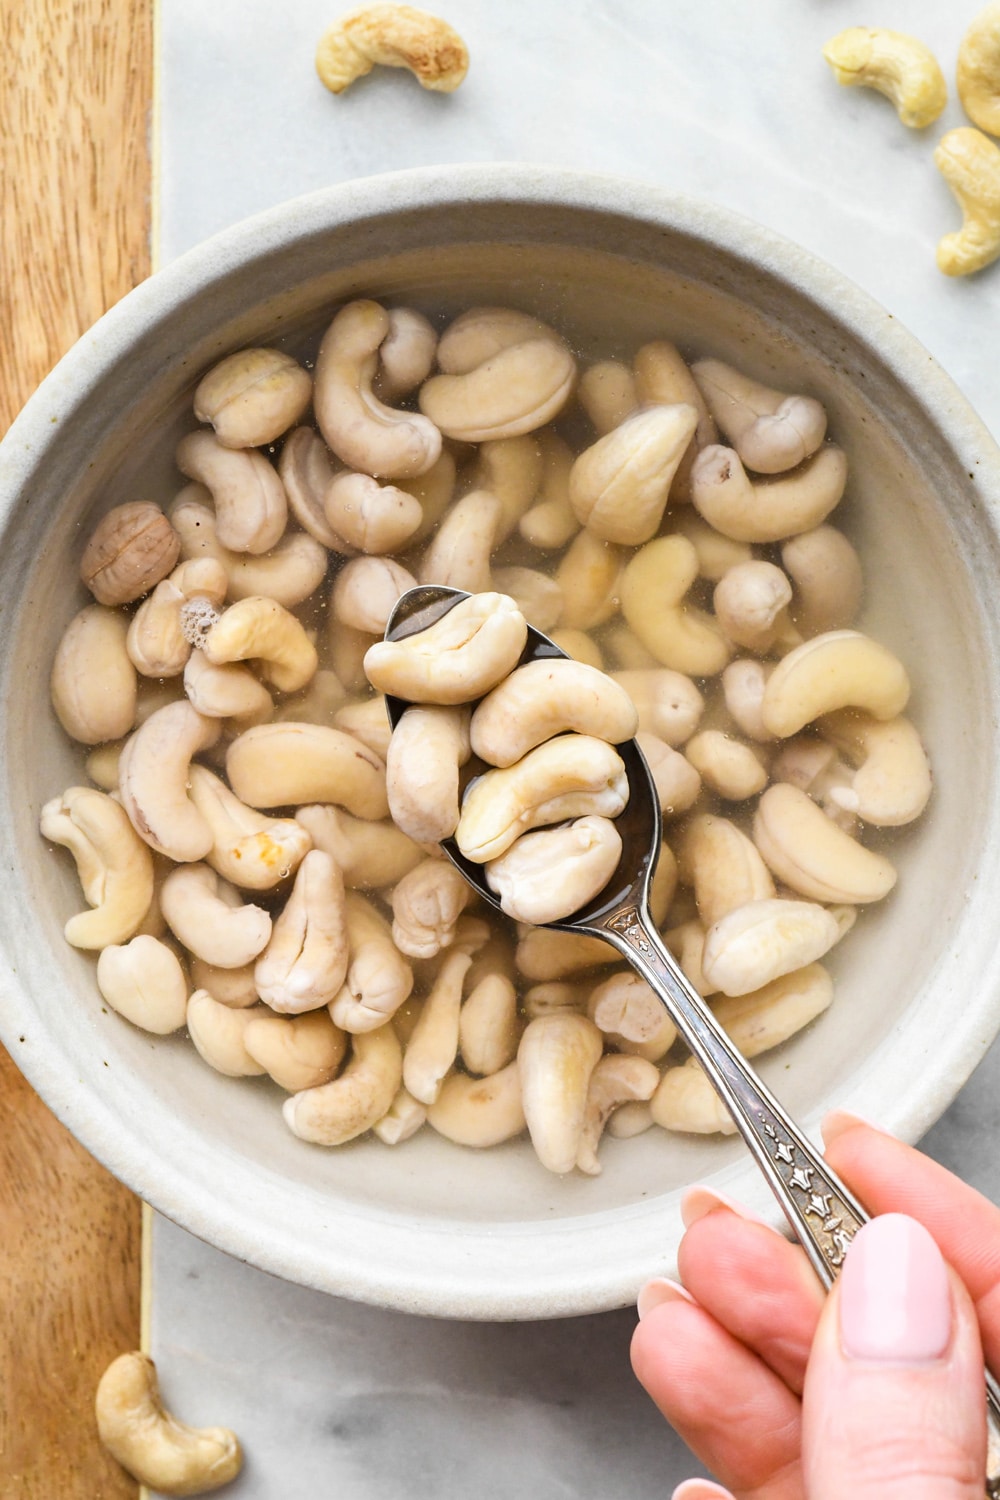 How to make cashew cream: Raw cashews in a bowl of water after soaking - cashews are pale in color and plump.